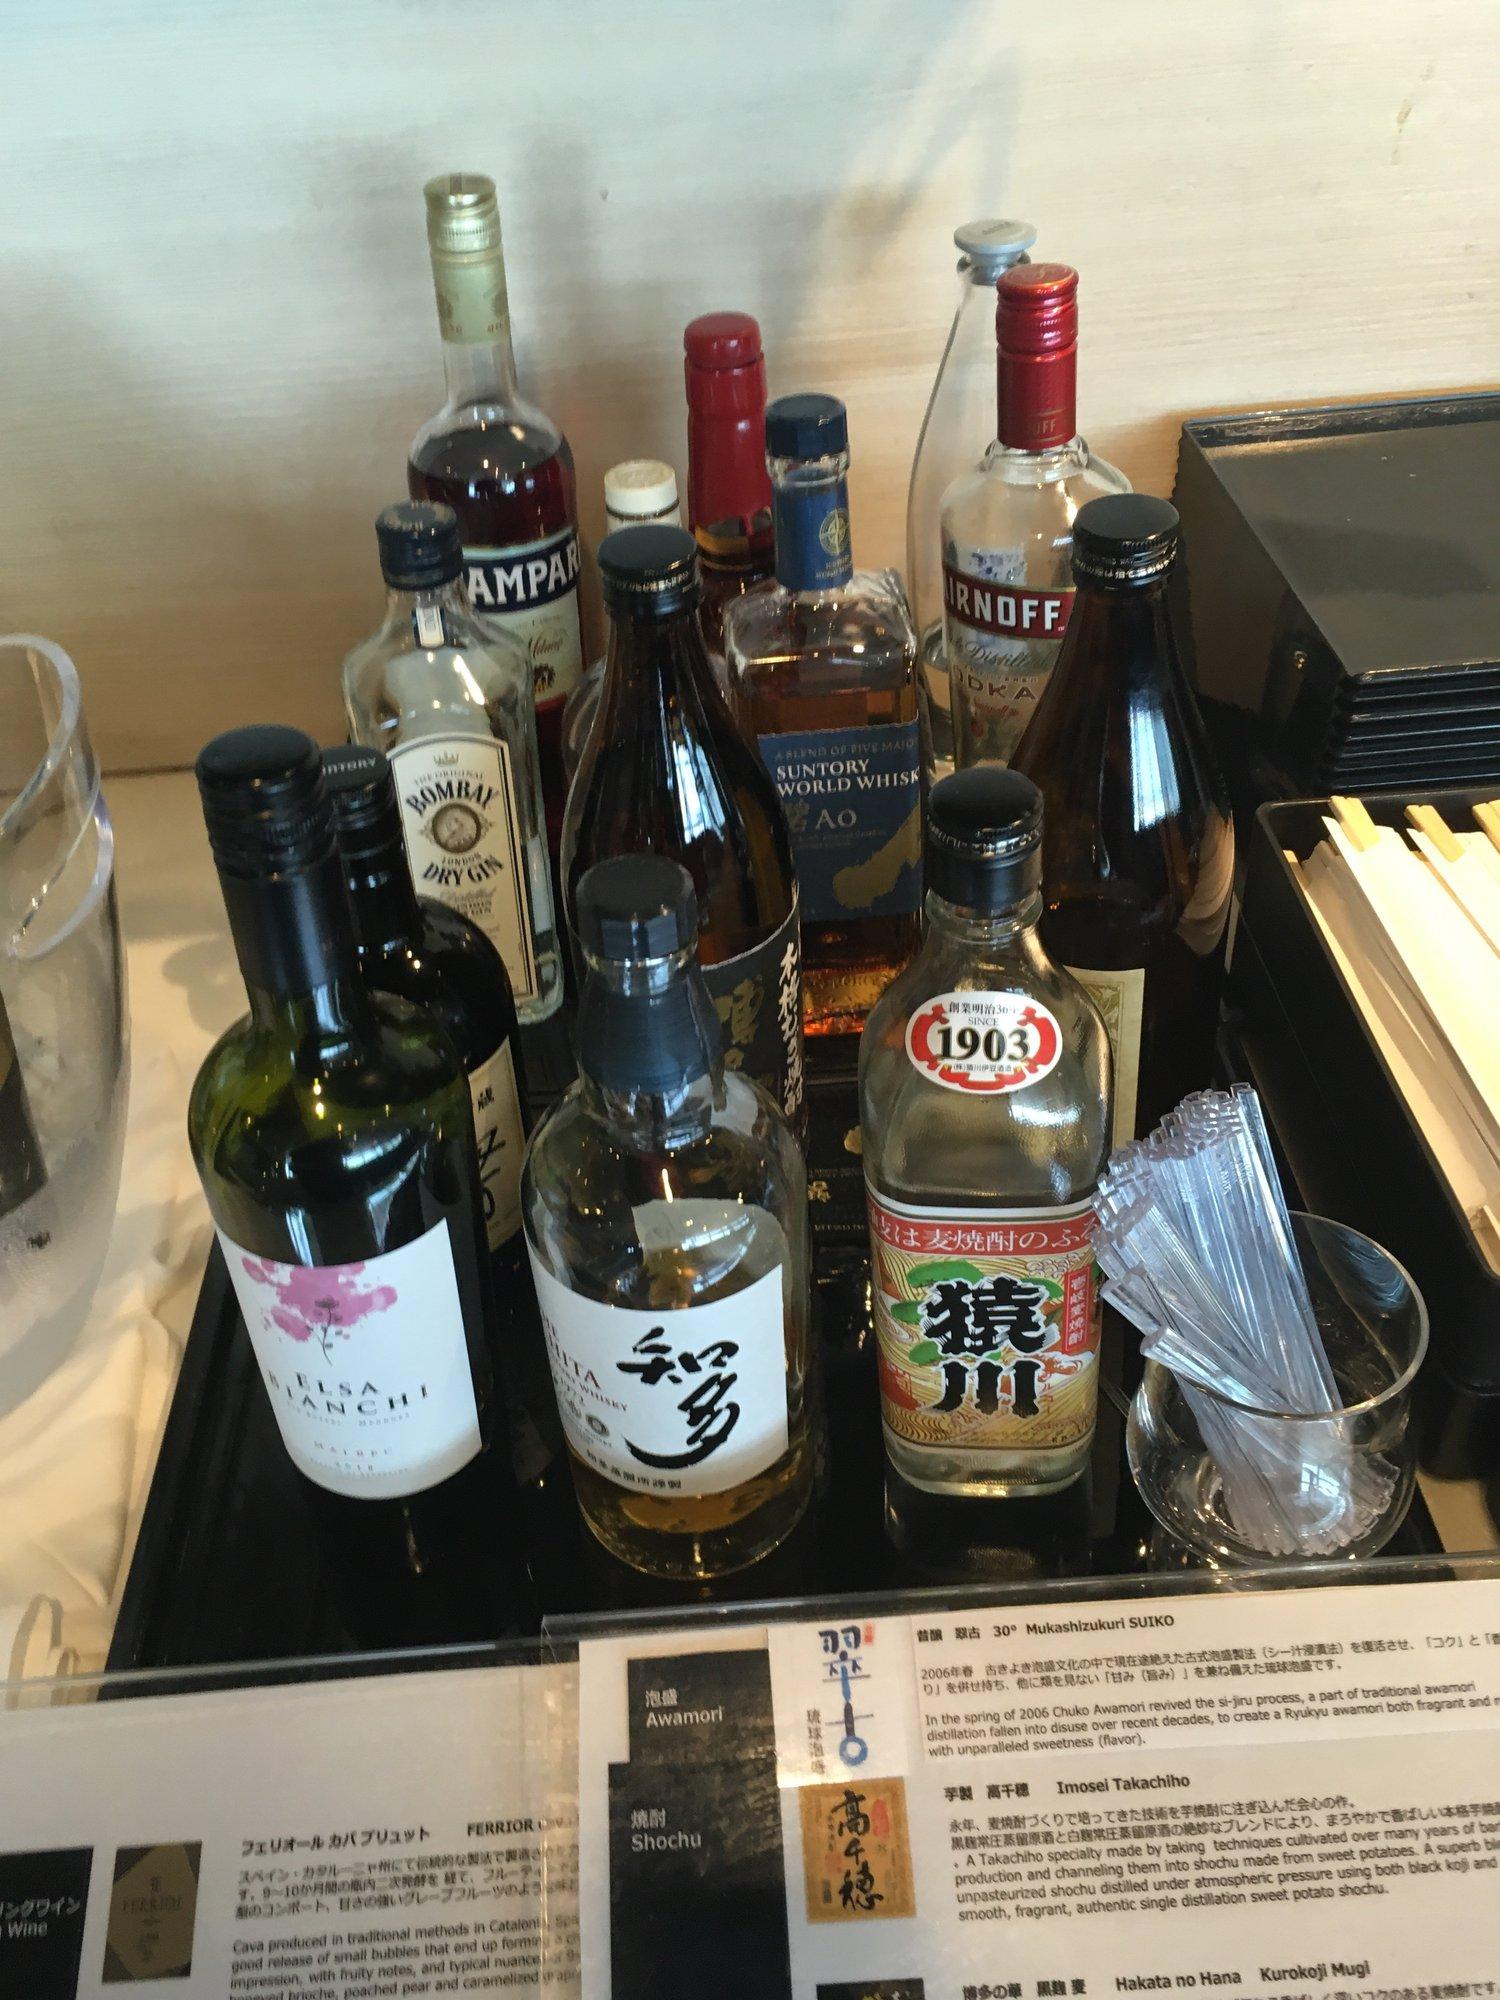 All Nippon Airways ANA Lounge (Gate 110) image 36 of 41